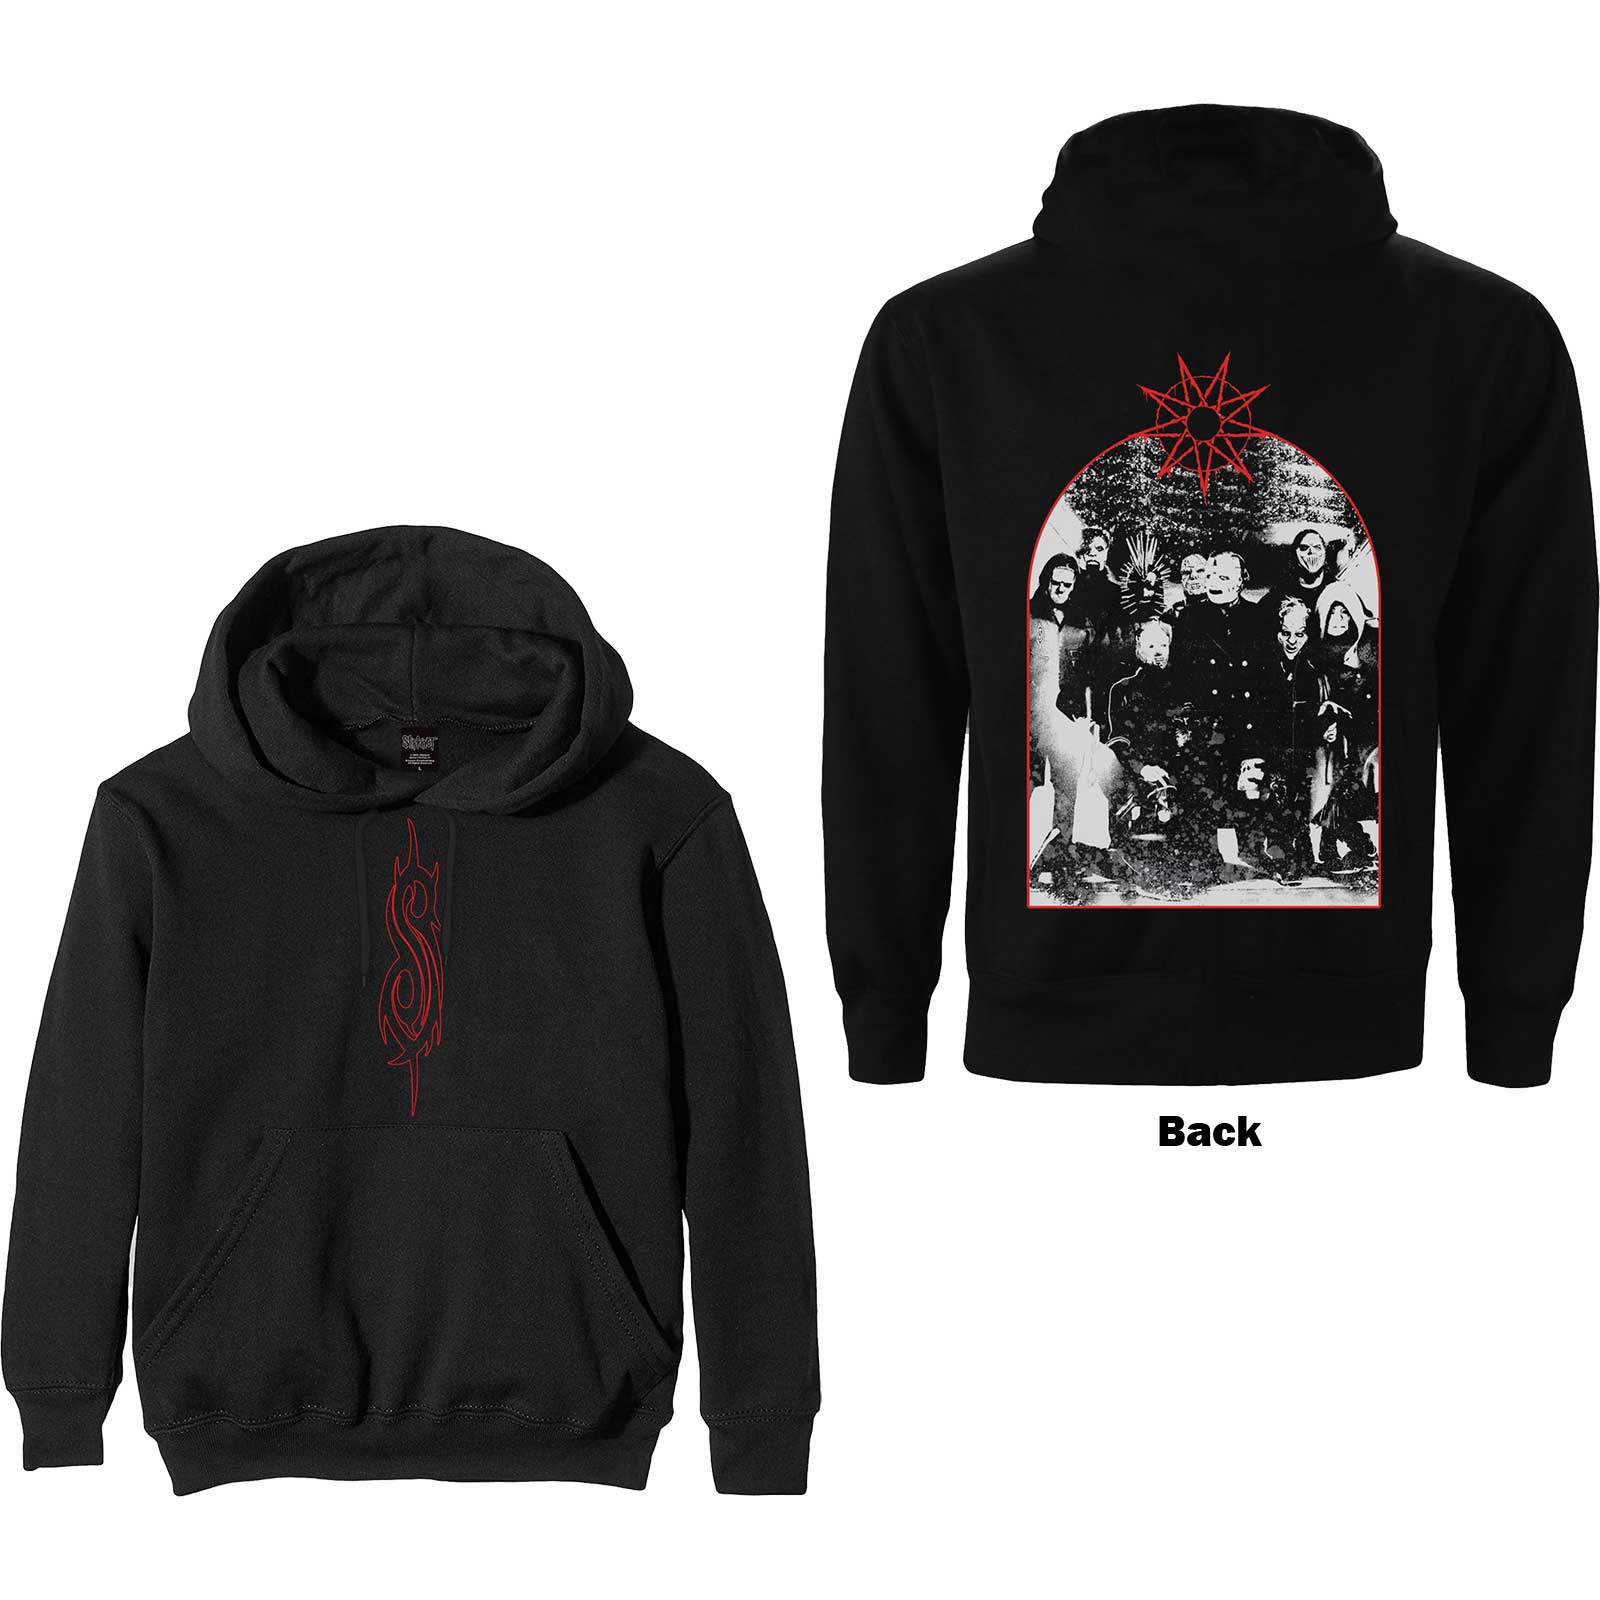 Slipknot - Arched Group Photo Hoodie